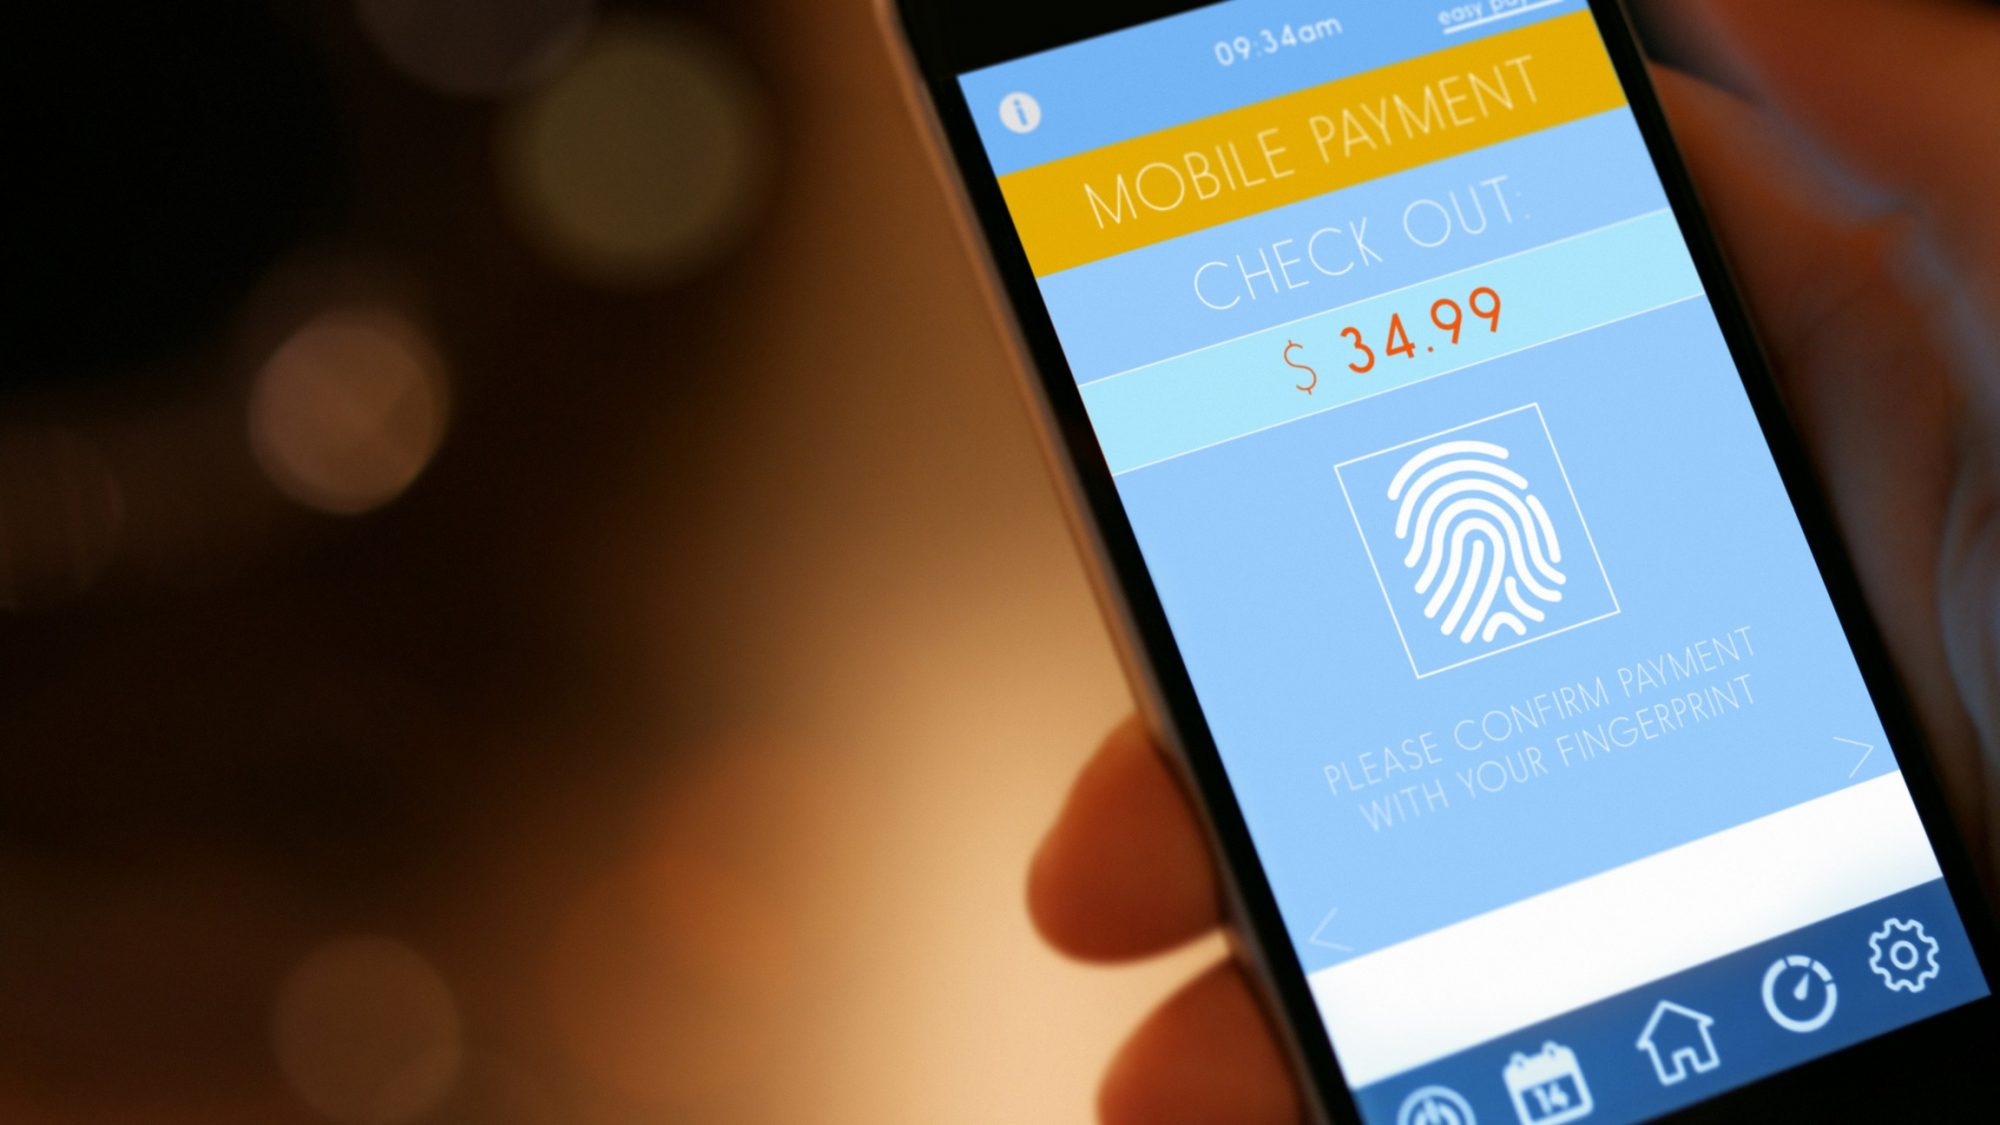 Mobile Payments in the San Francisco Bay Area